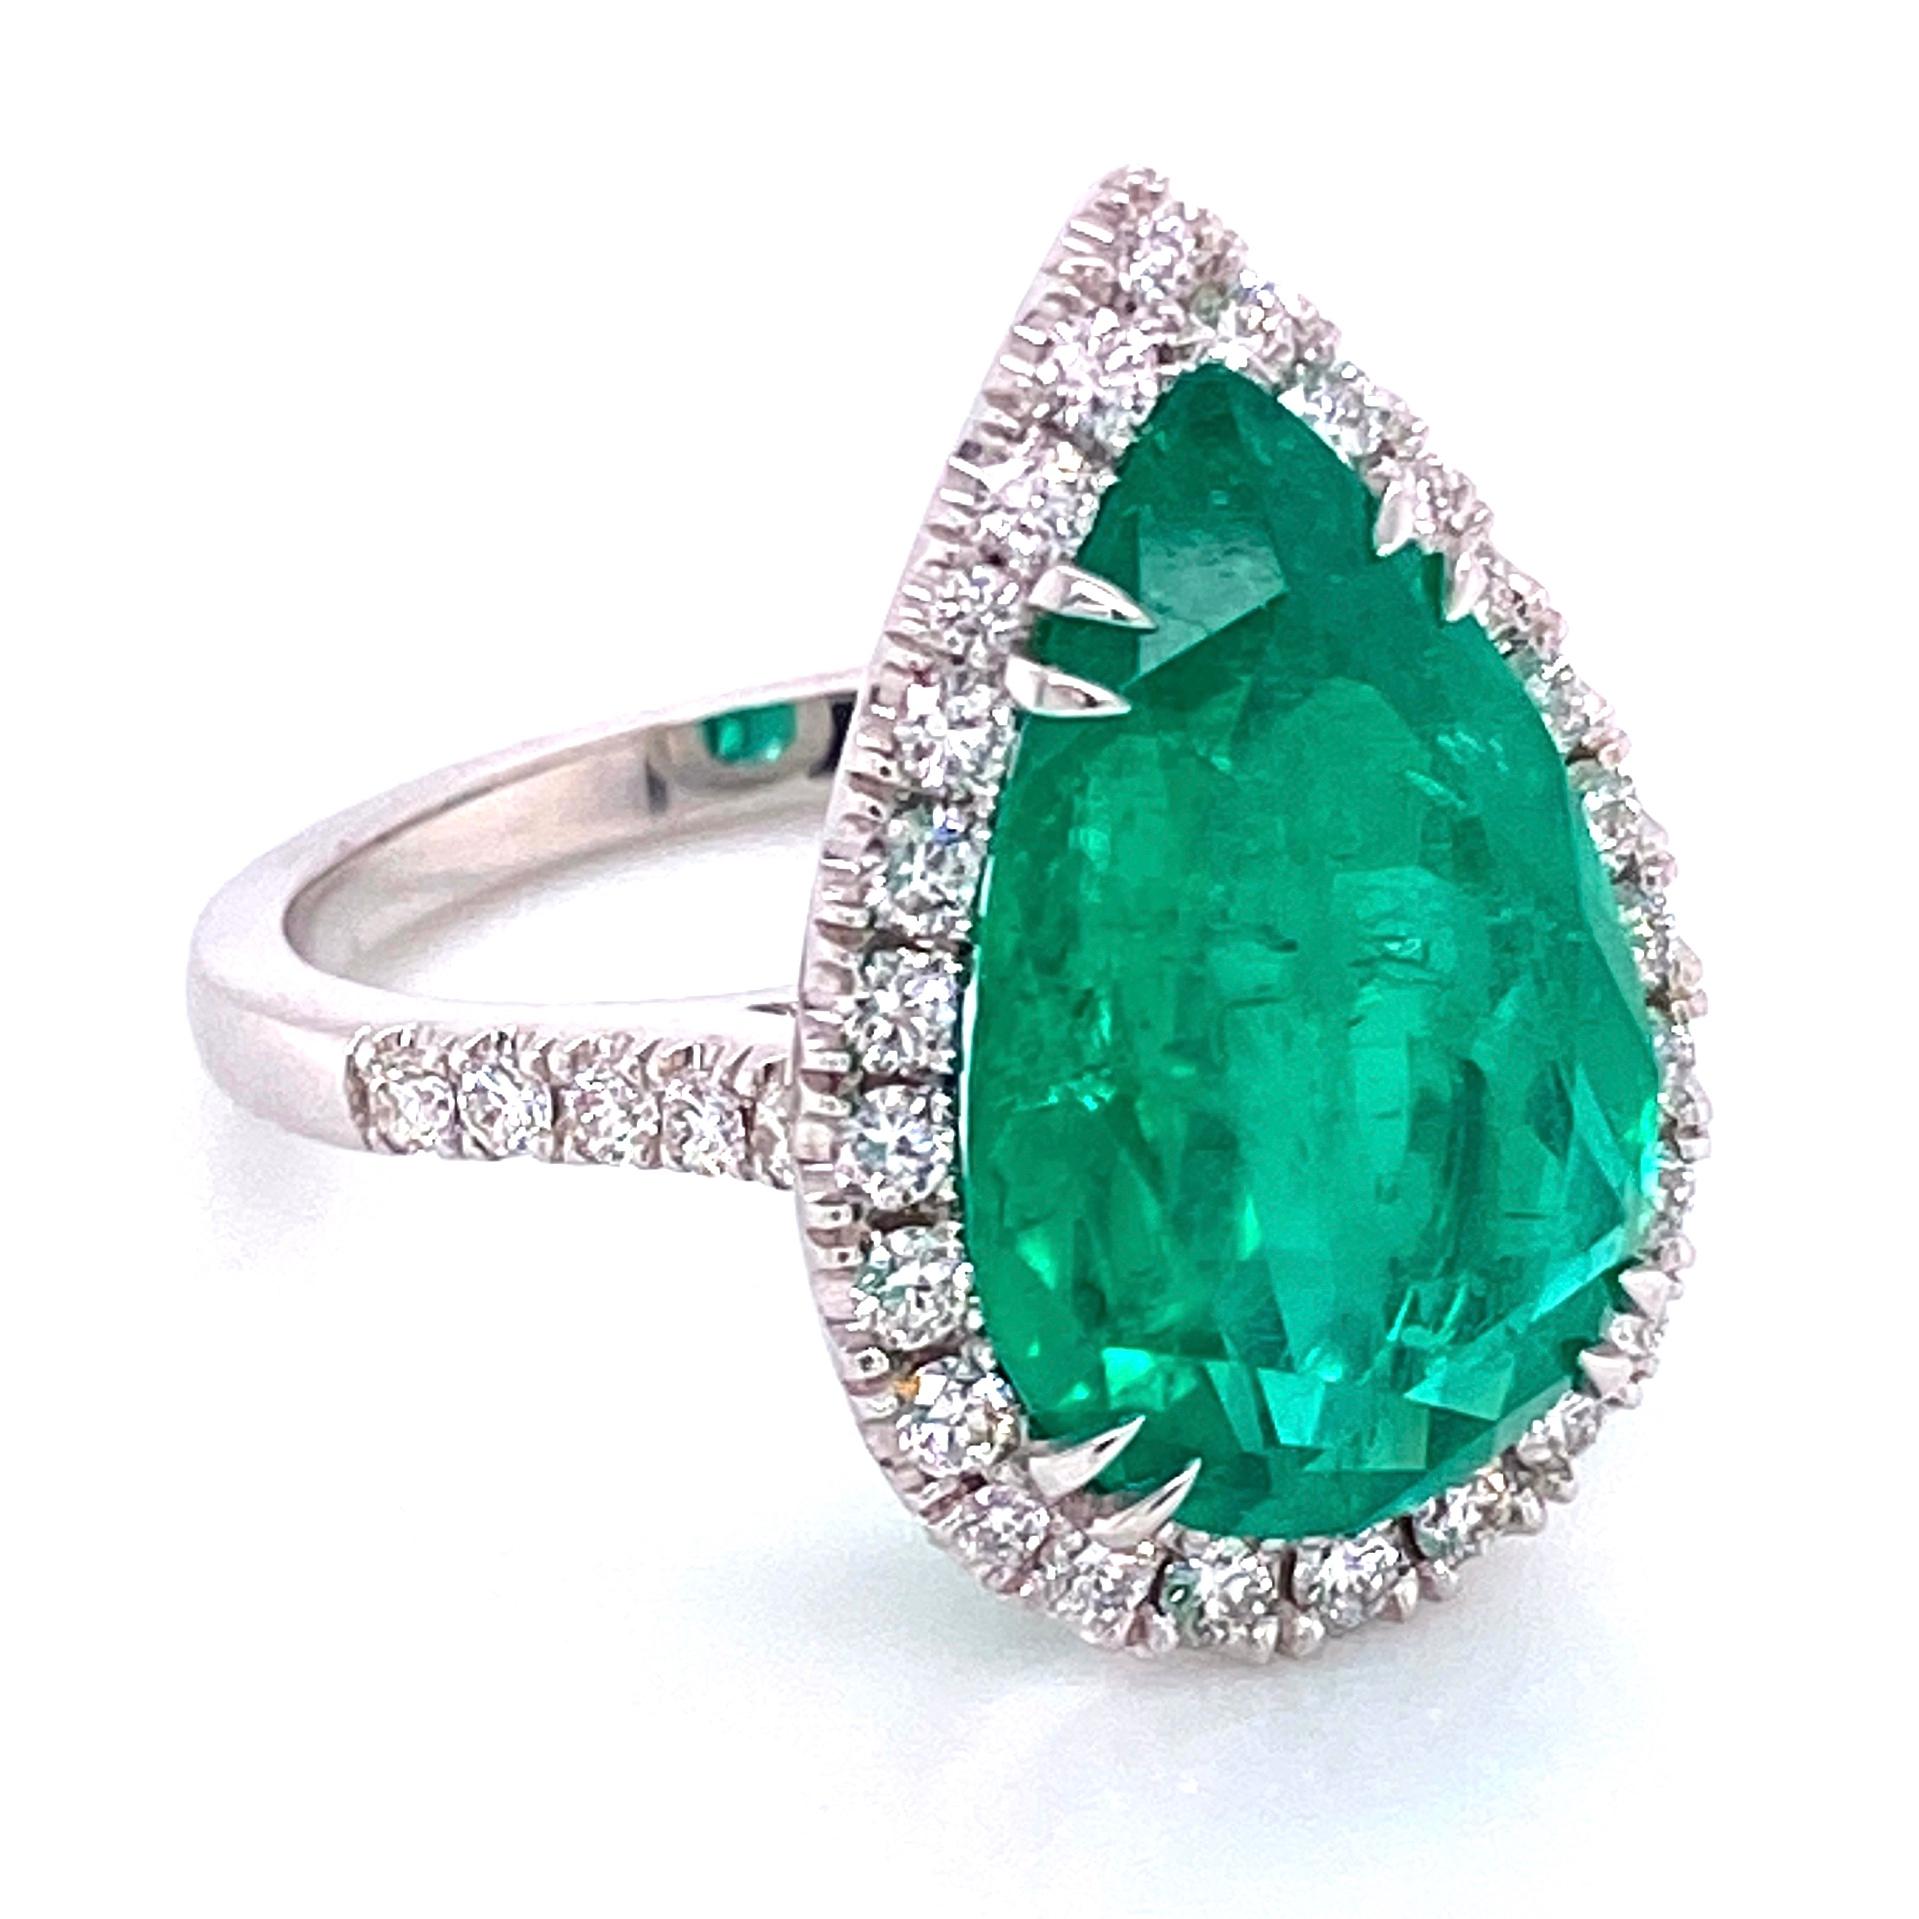 Modern 6.96 Carat Pear Shaped Emerald and Diamond Ring Estate Fine Jewelry For Sale